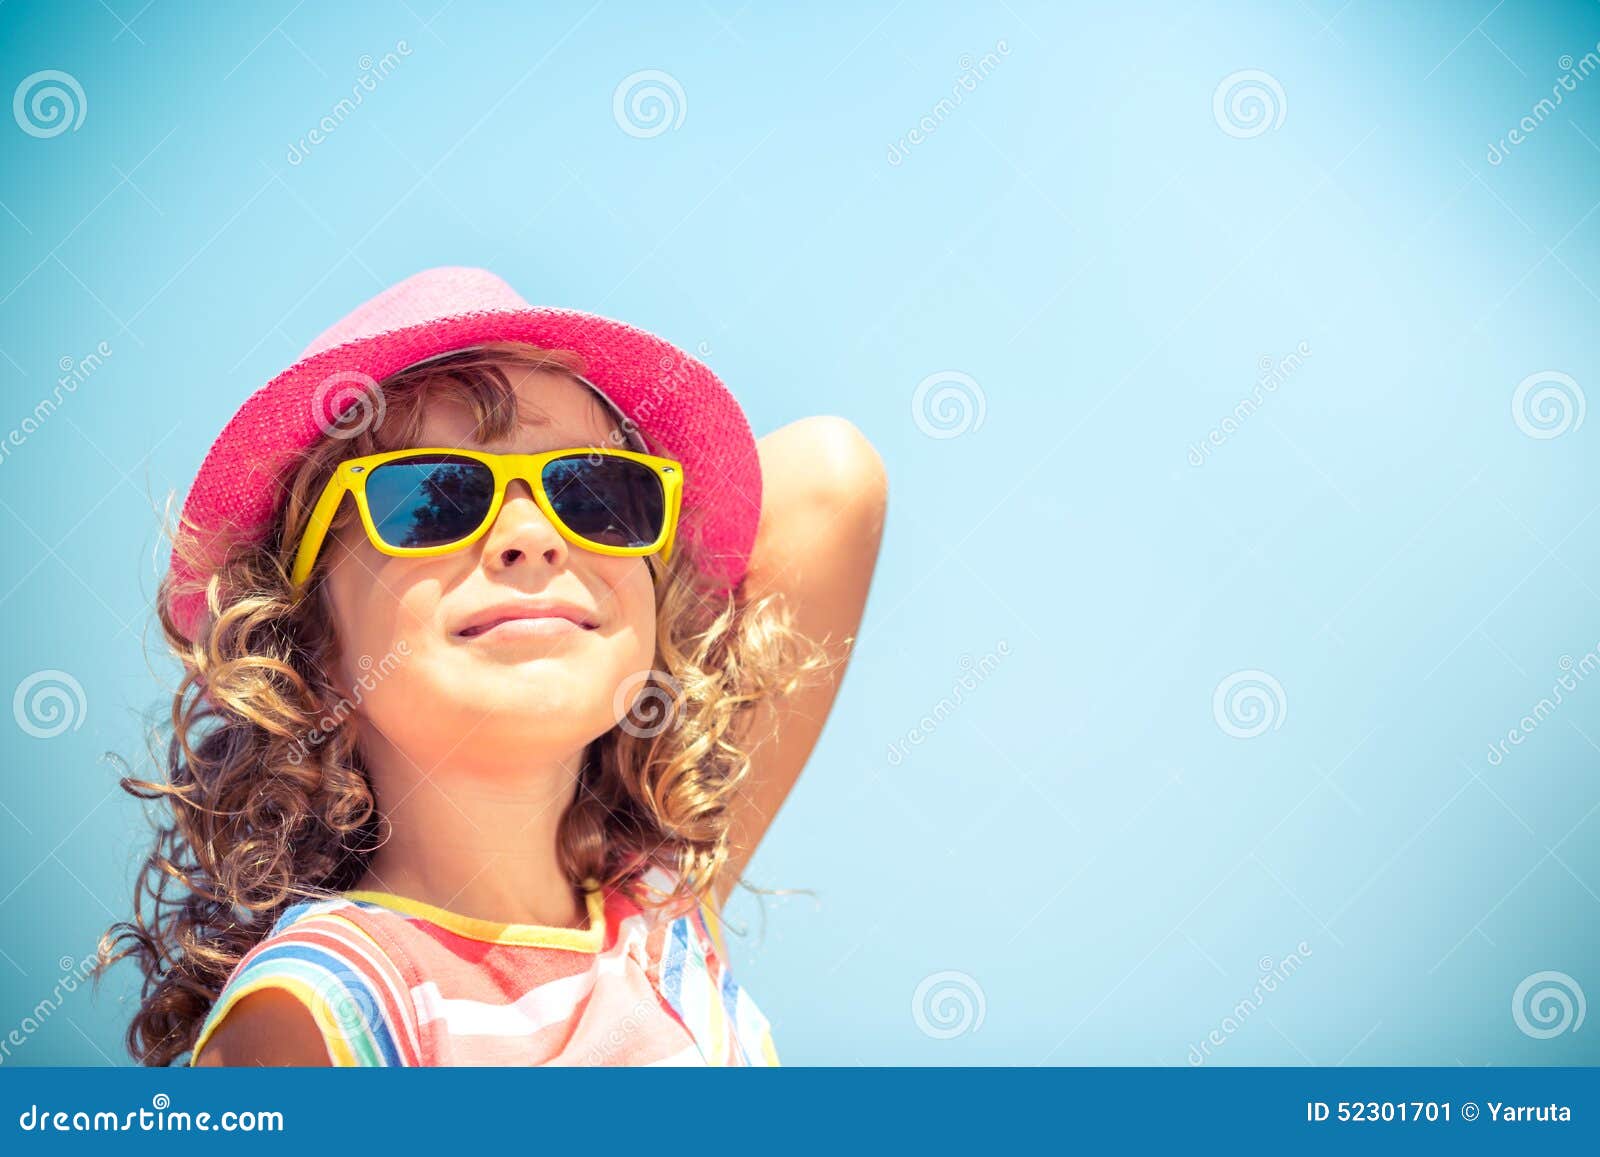 Happy Child on Summer Vacation Stock Image - Image of adventure ...